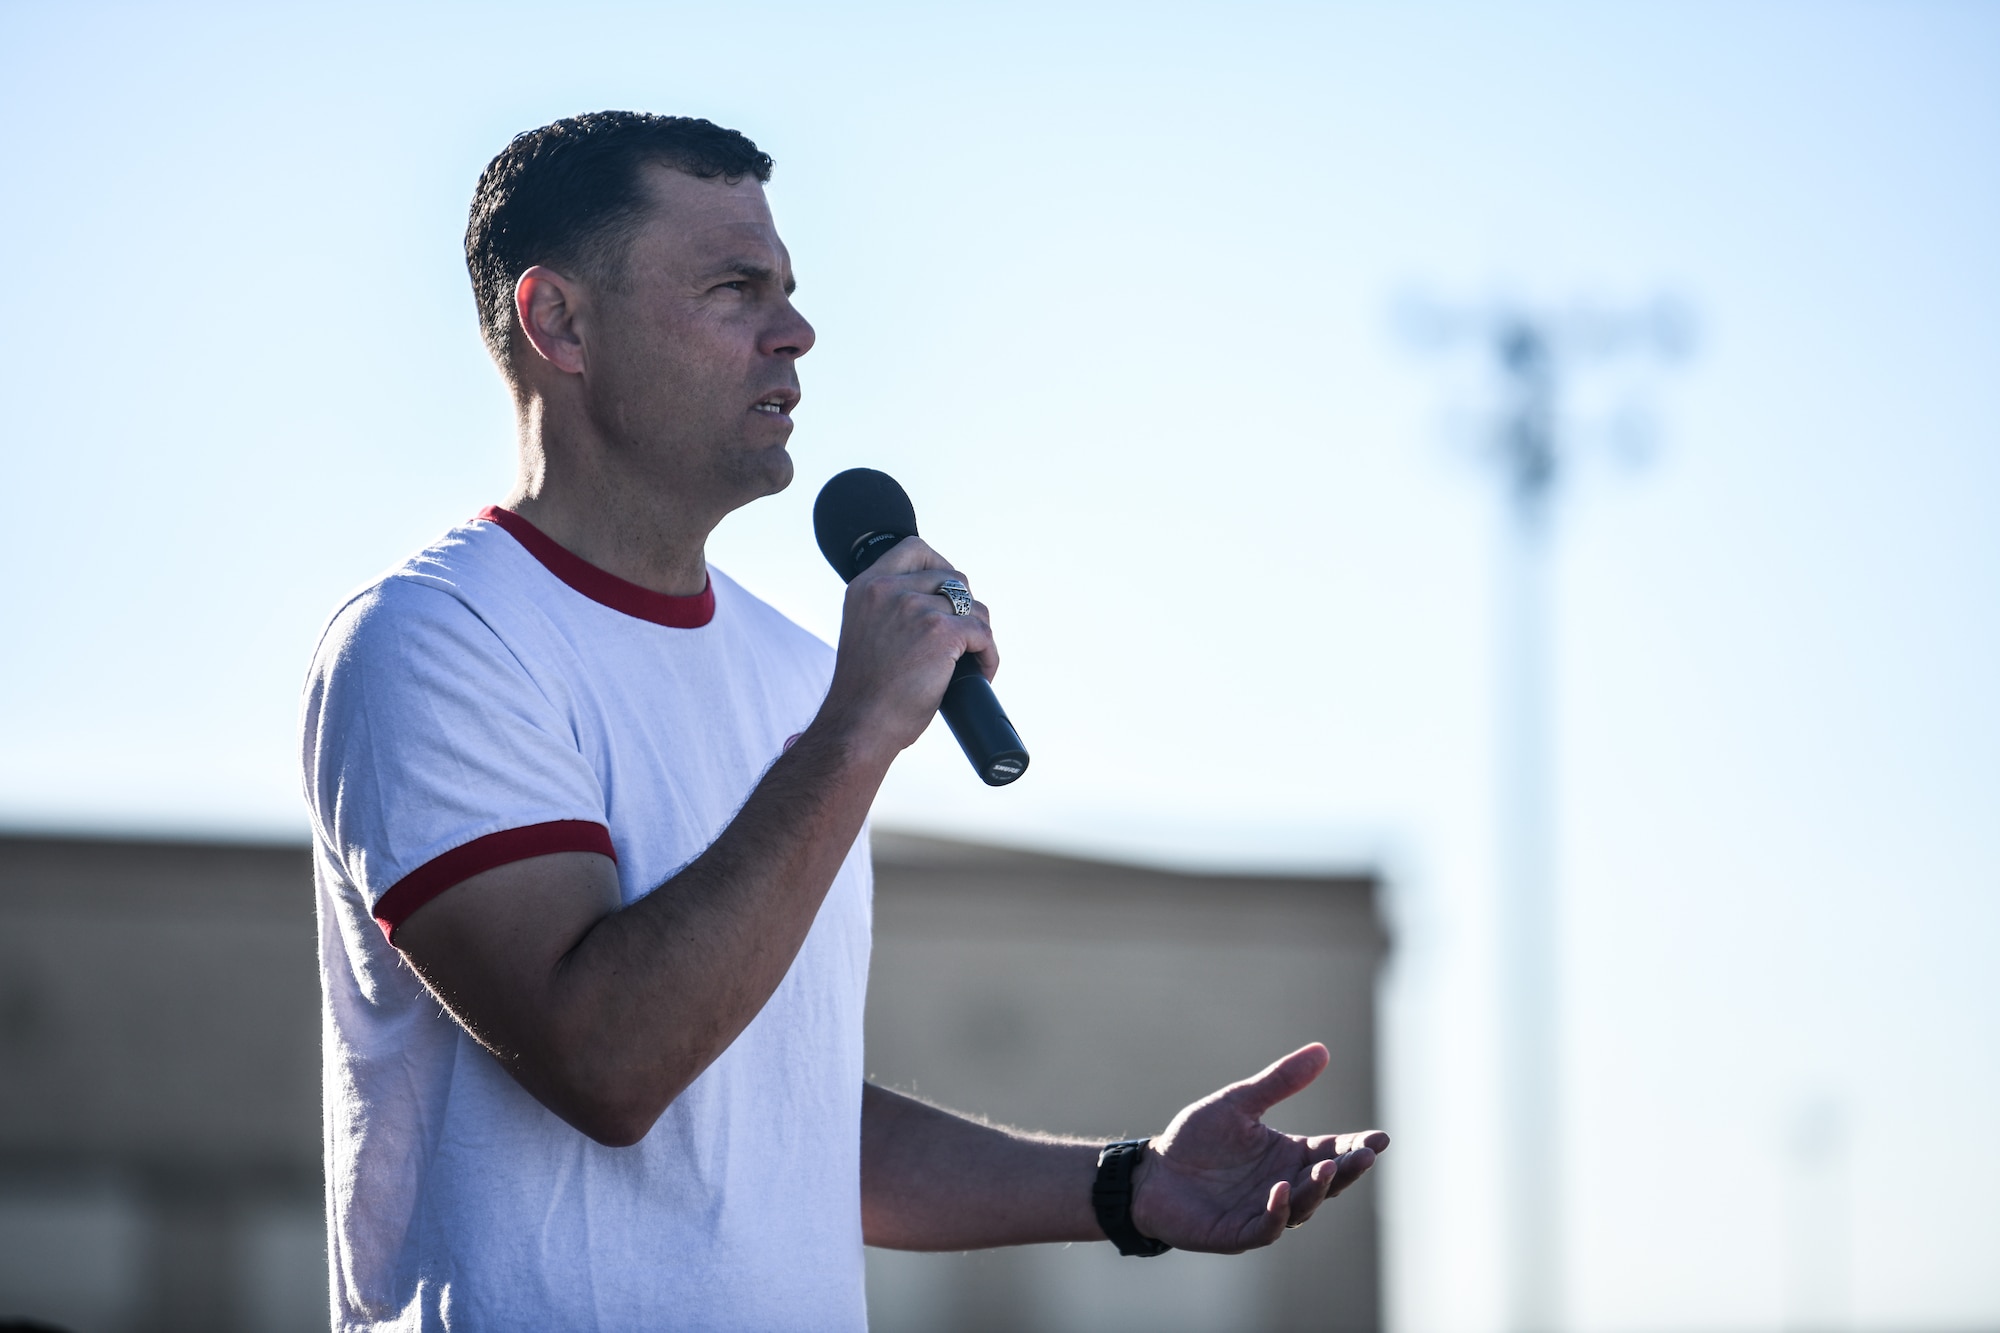 Col. Thad Middleton, 22nd Operations Group commander, gives an opening statement before the first annual Run-the-Runway event June 4, 2021, at McConnell Air Force Base, Kansas. The purpose of the event was to increase morale through fitness. (U.S. Air Force photo by Senior Airman Alan Ricker)